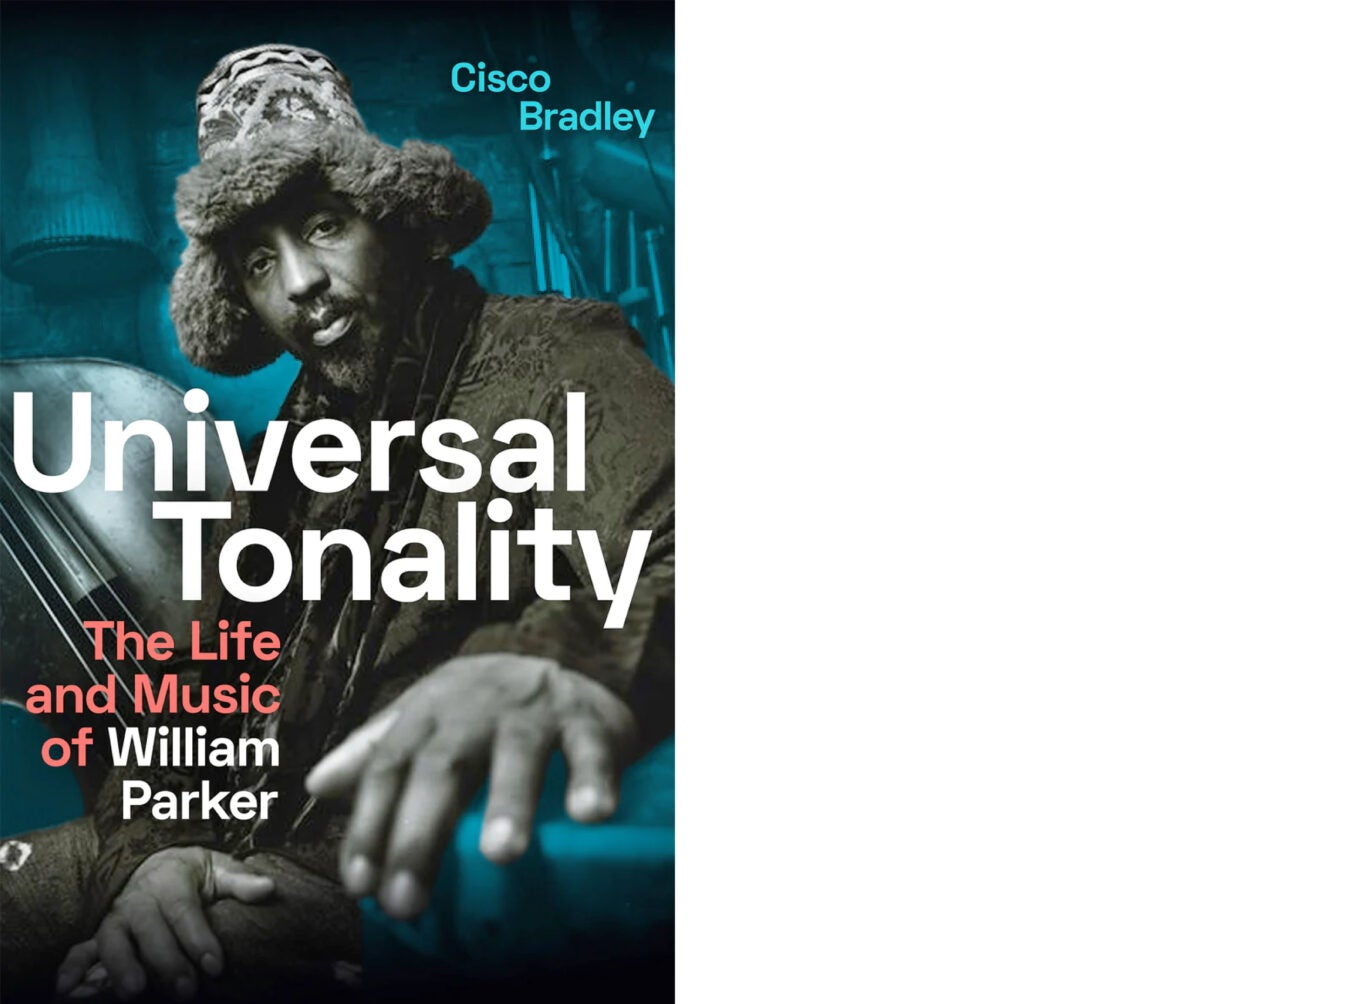 Book cover: "Universal Tonality: The Life and Music of William Parker ."